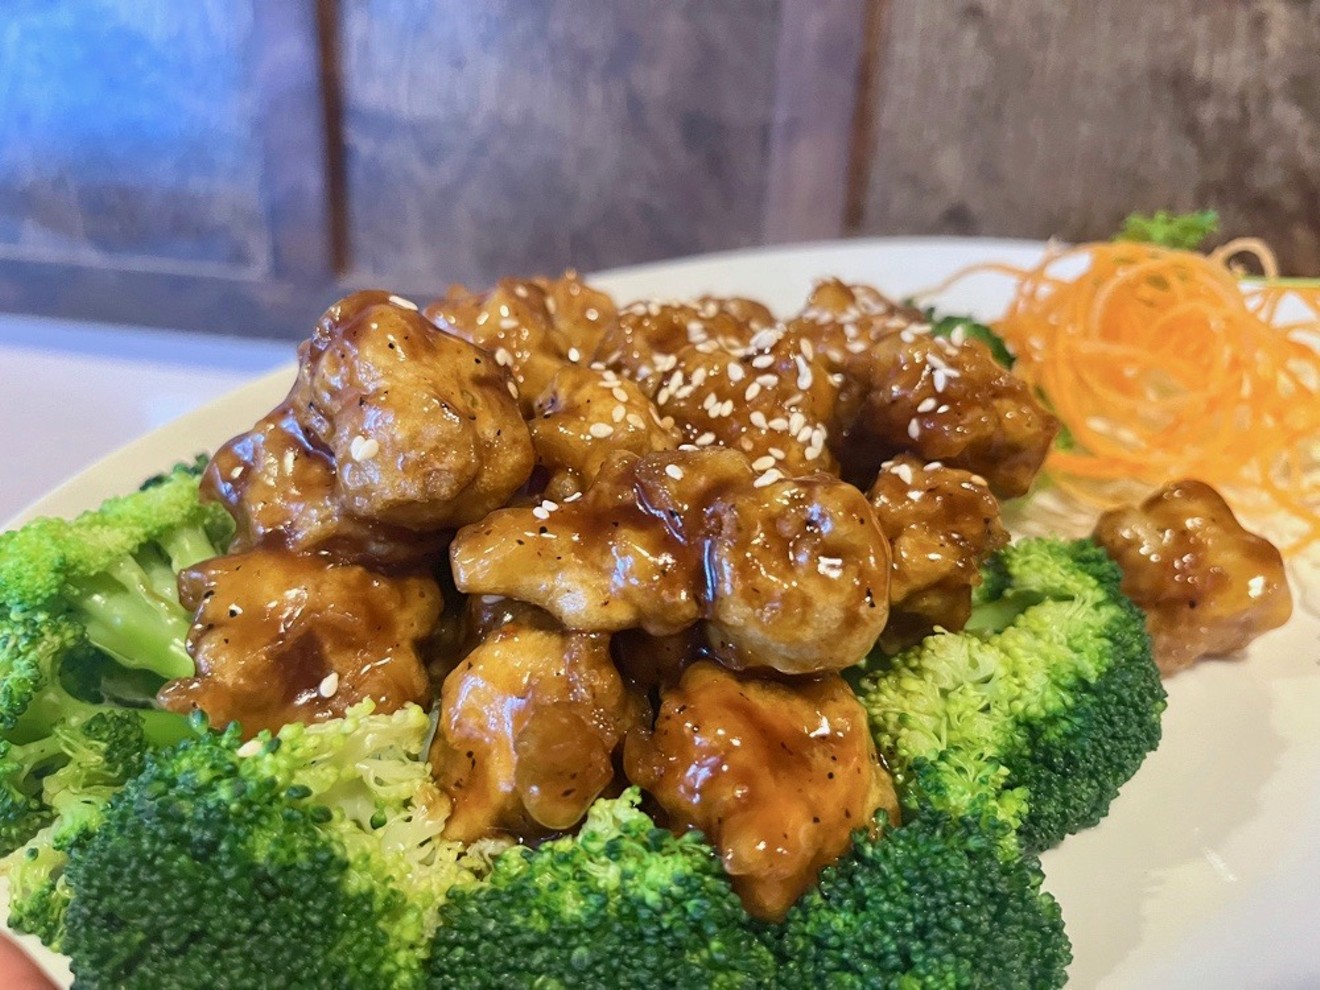 Vega sesame tofu is an homage to traditional sesame chicken.